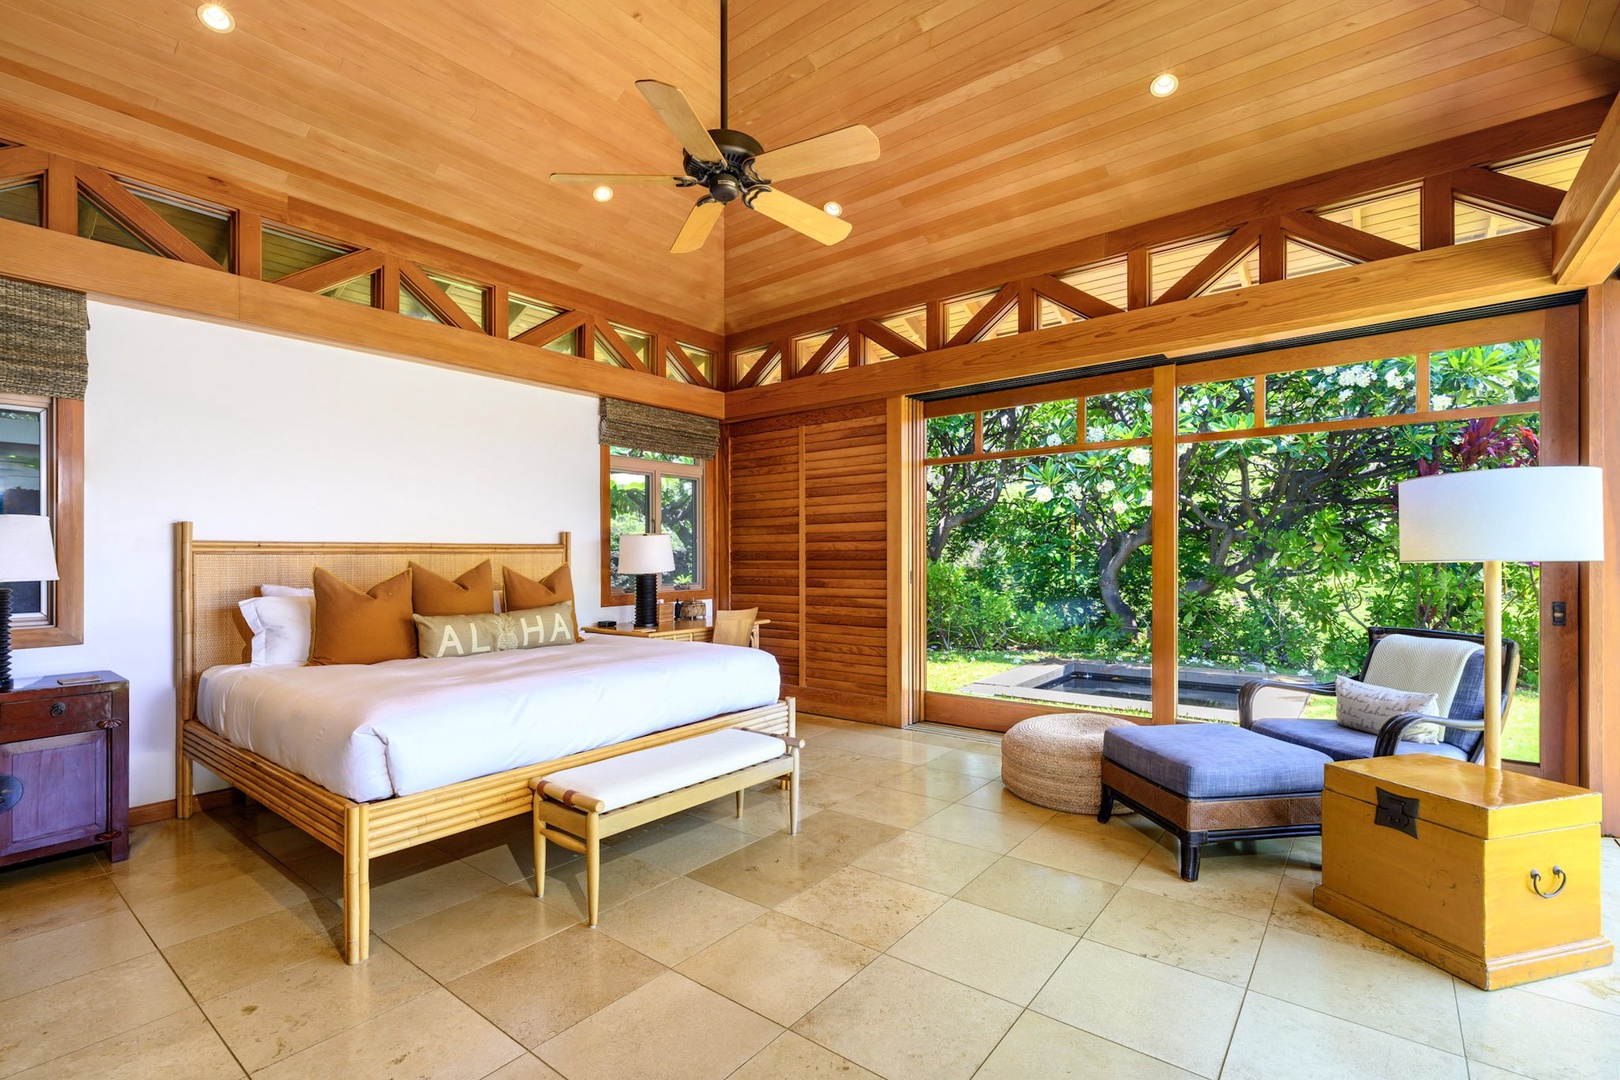 Kamuela Vacation Rentals, 3BD Na Hale 3 at Pauoa Beach Club at Mauna Lani Resort - The primary suite boasts a sanctuary of tranquility, featuring lofted ceilings, a king bed and wall-to-wall sliders opening directly to the hot tub and pool.